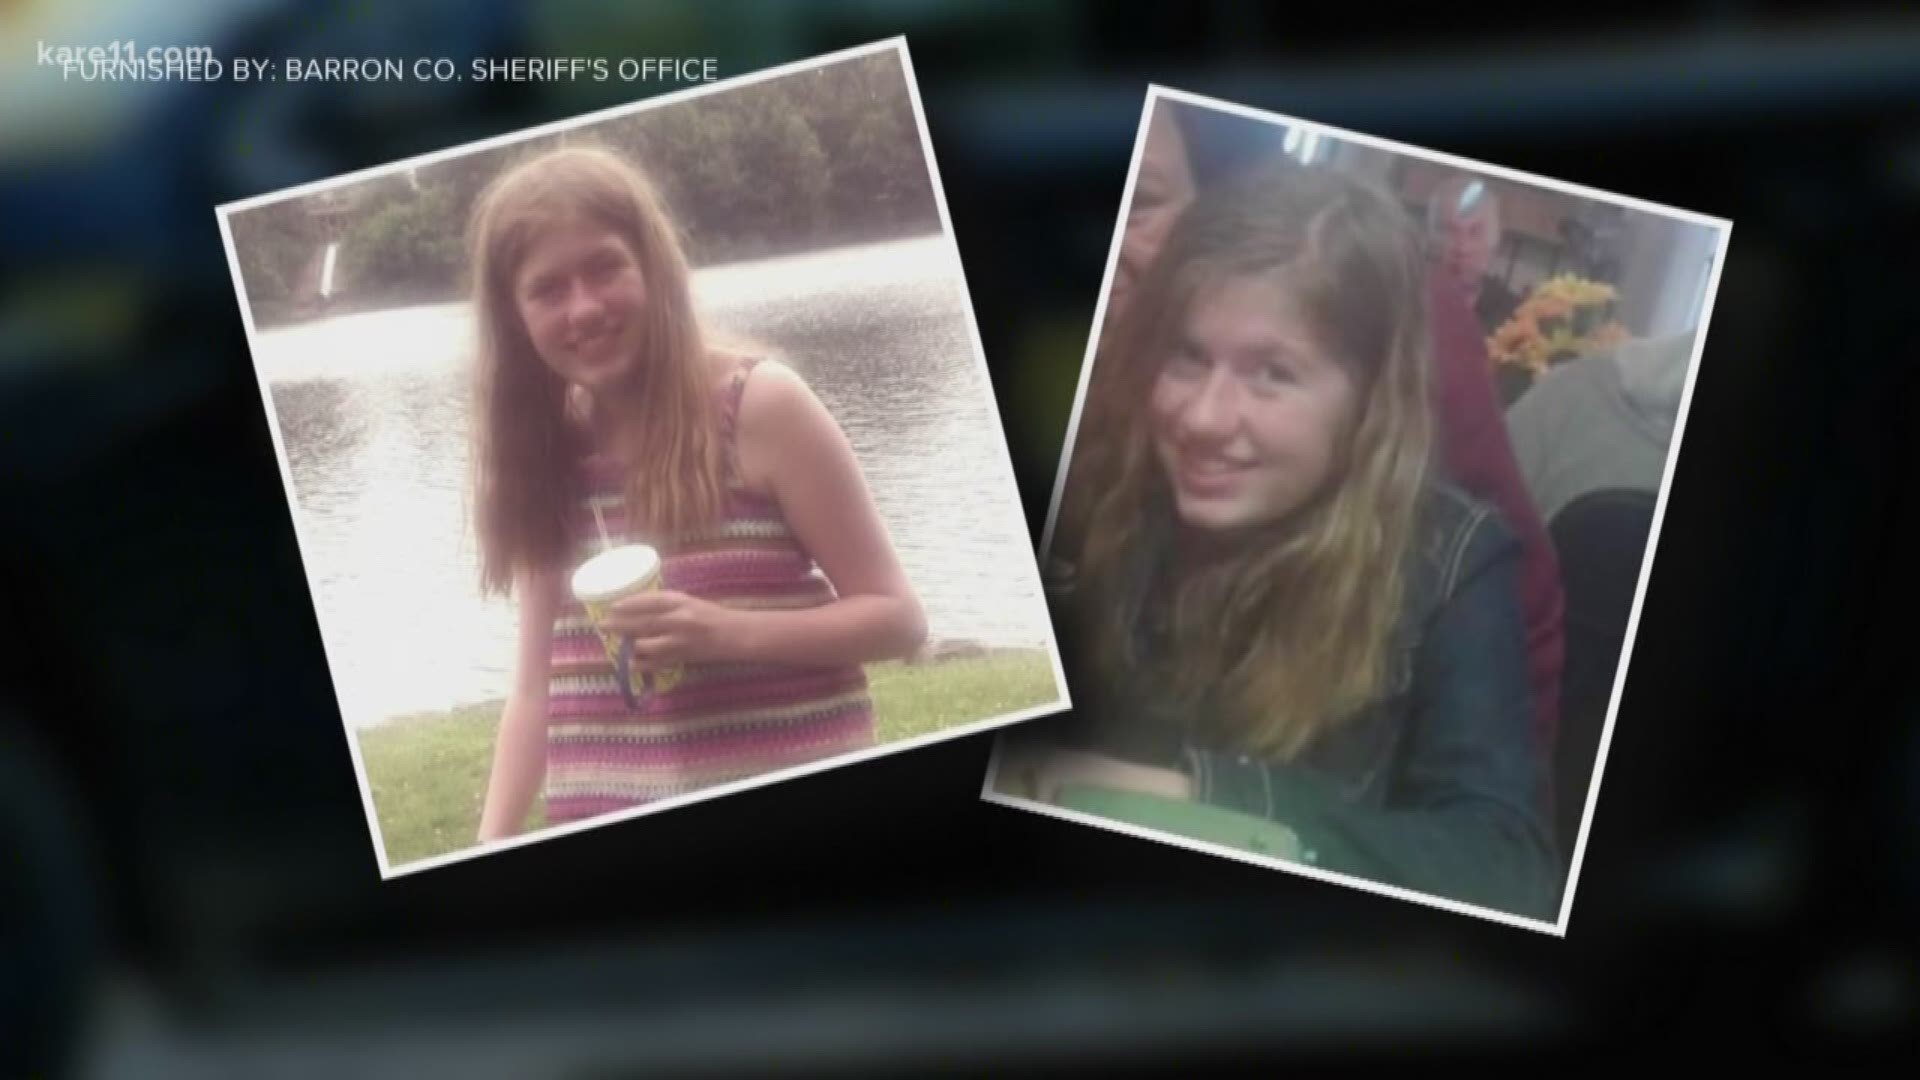 Dispatch logs show multiple shots were fired in the home of a northwestern Wisconsin girl who vanished after her parents were found dead inside the house.